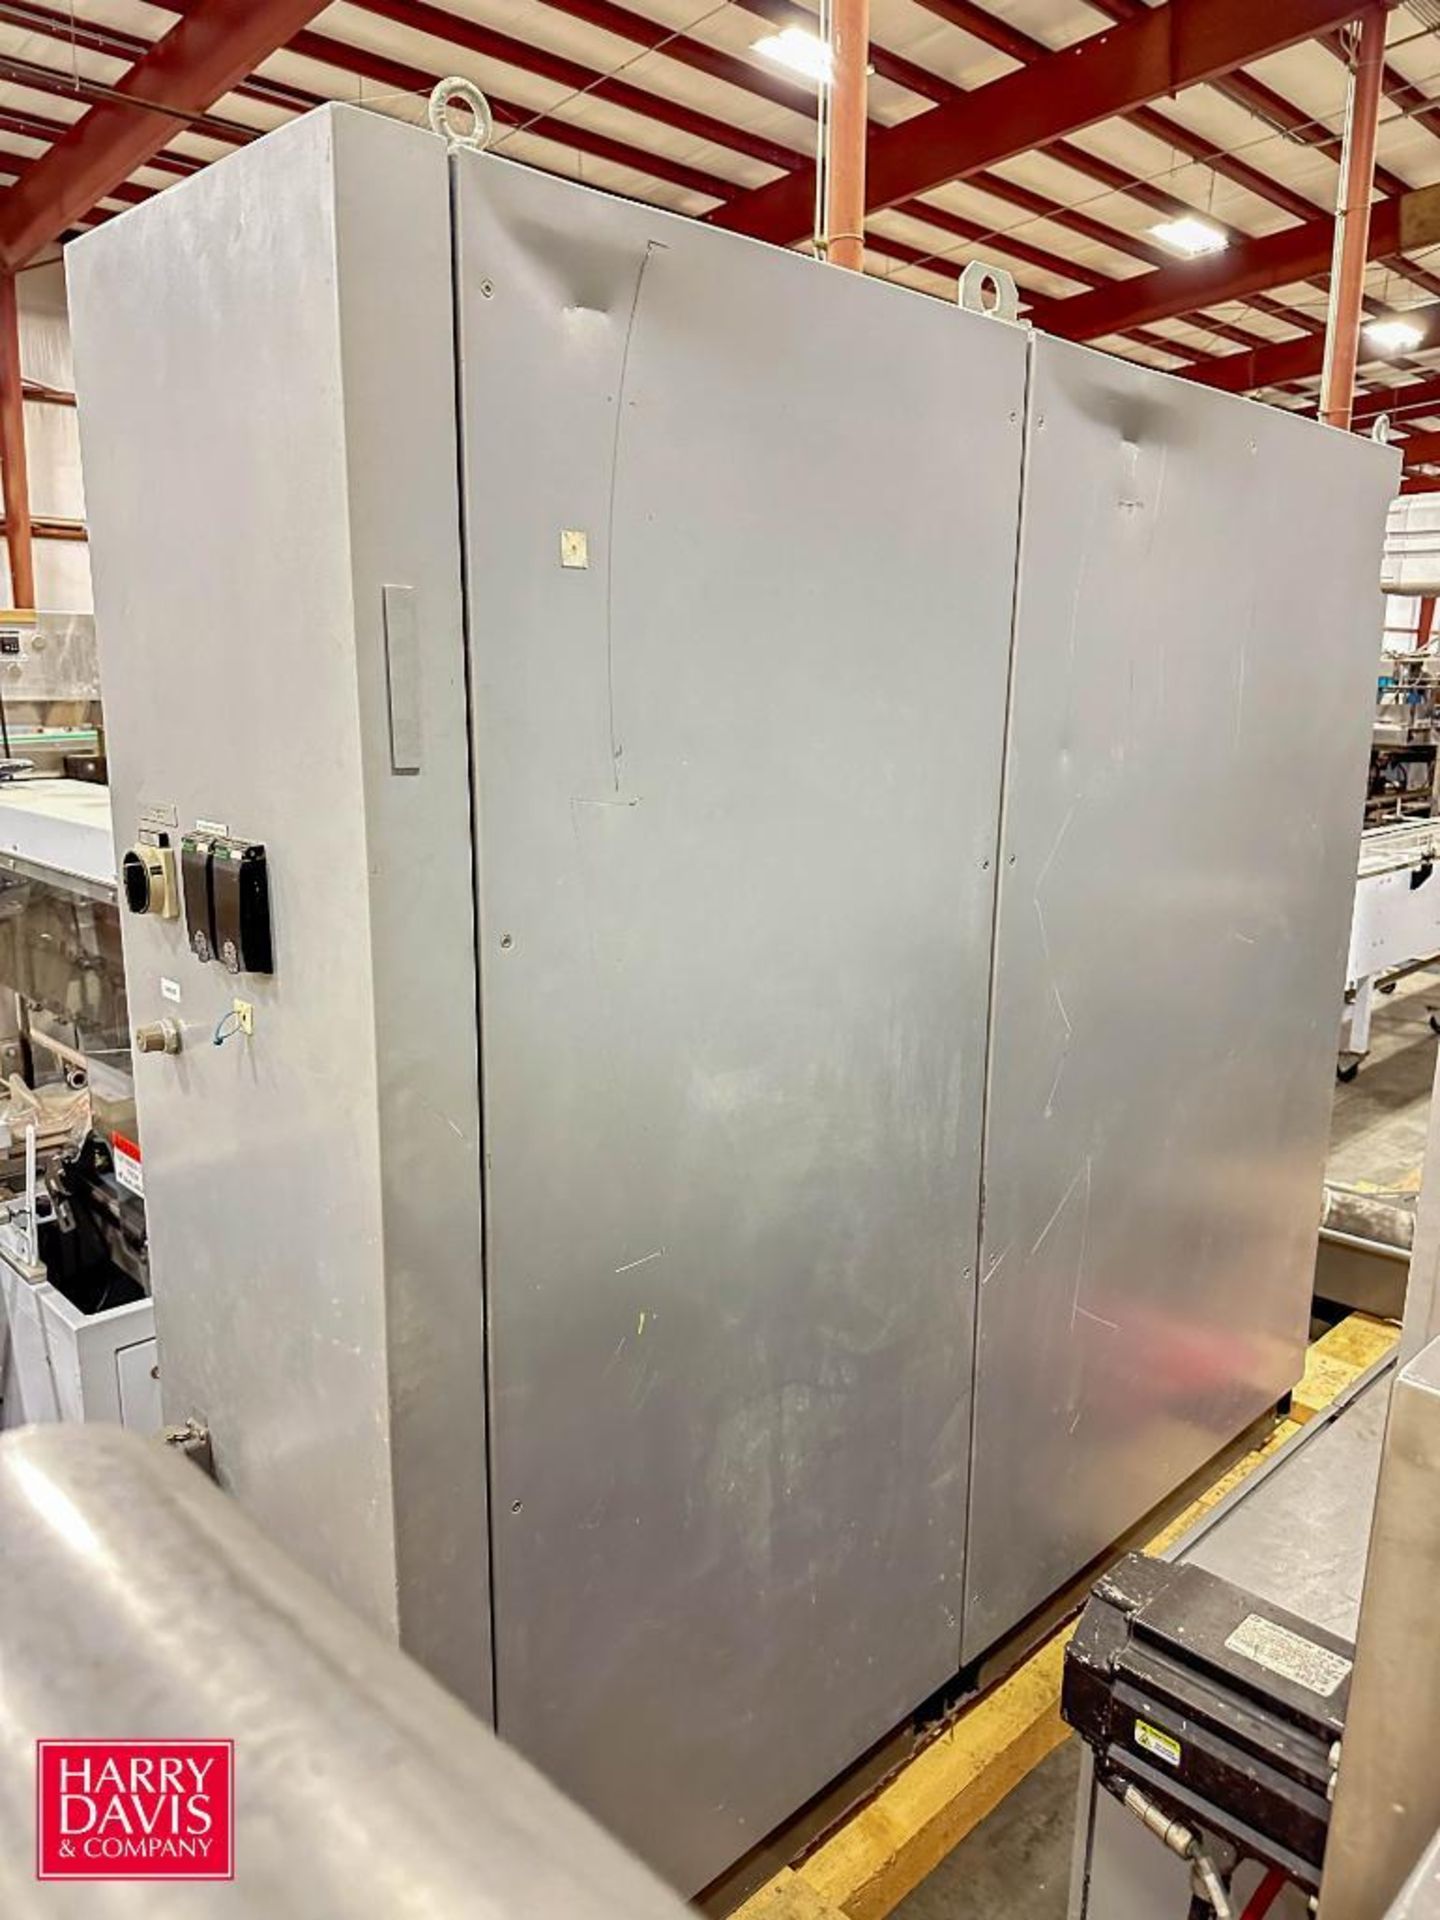 THEEGARTEN PACTEC Wrapper, Model: FPC5, S/N: FPC5006 with Vacuum Blower and Allen-Bradley PanelView - Image 5 of 5